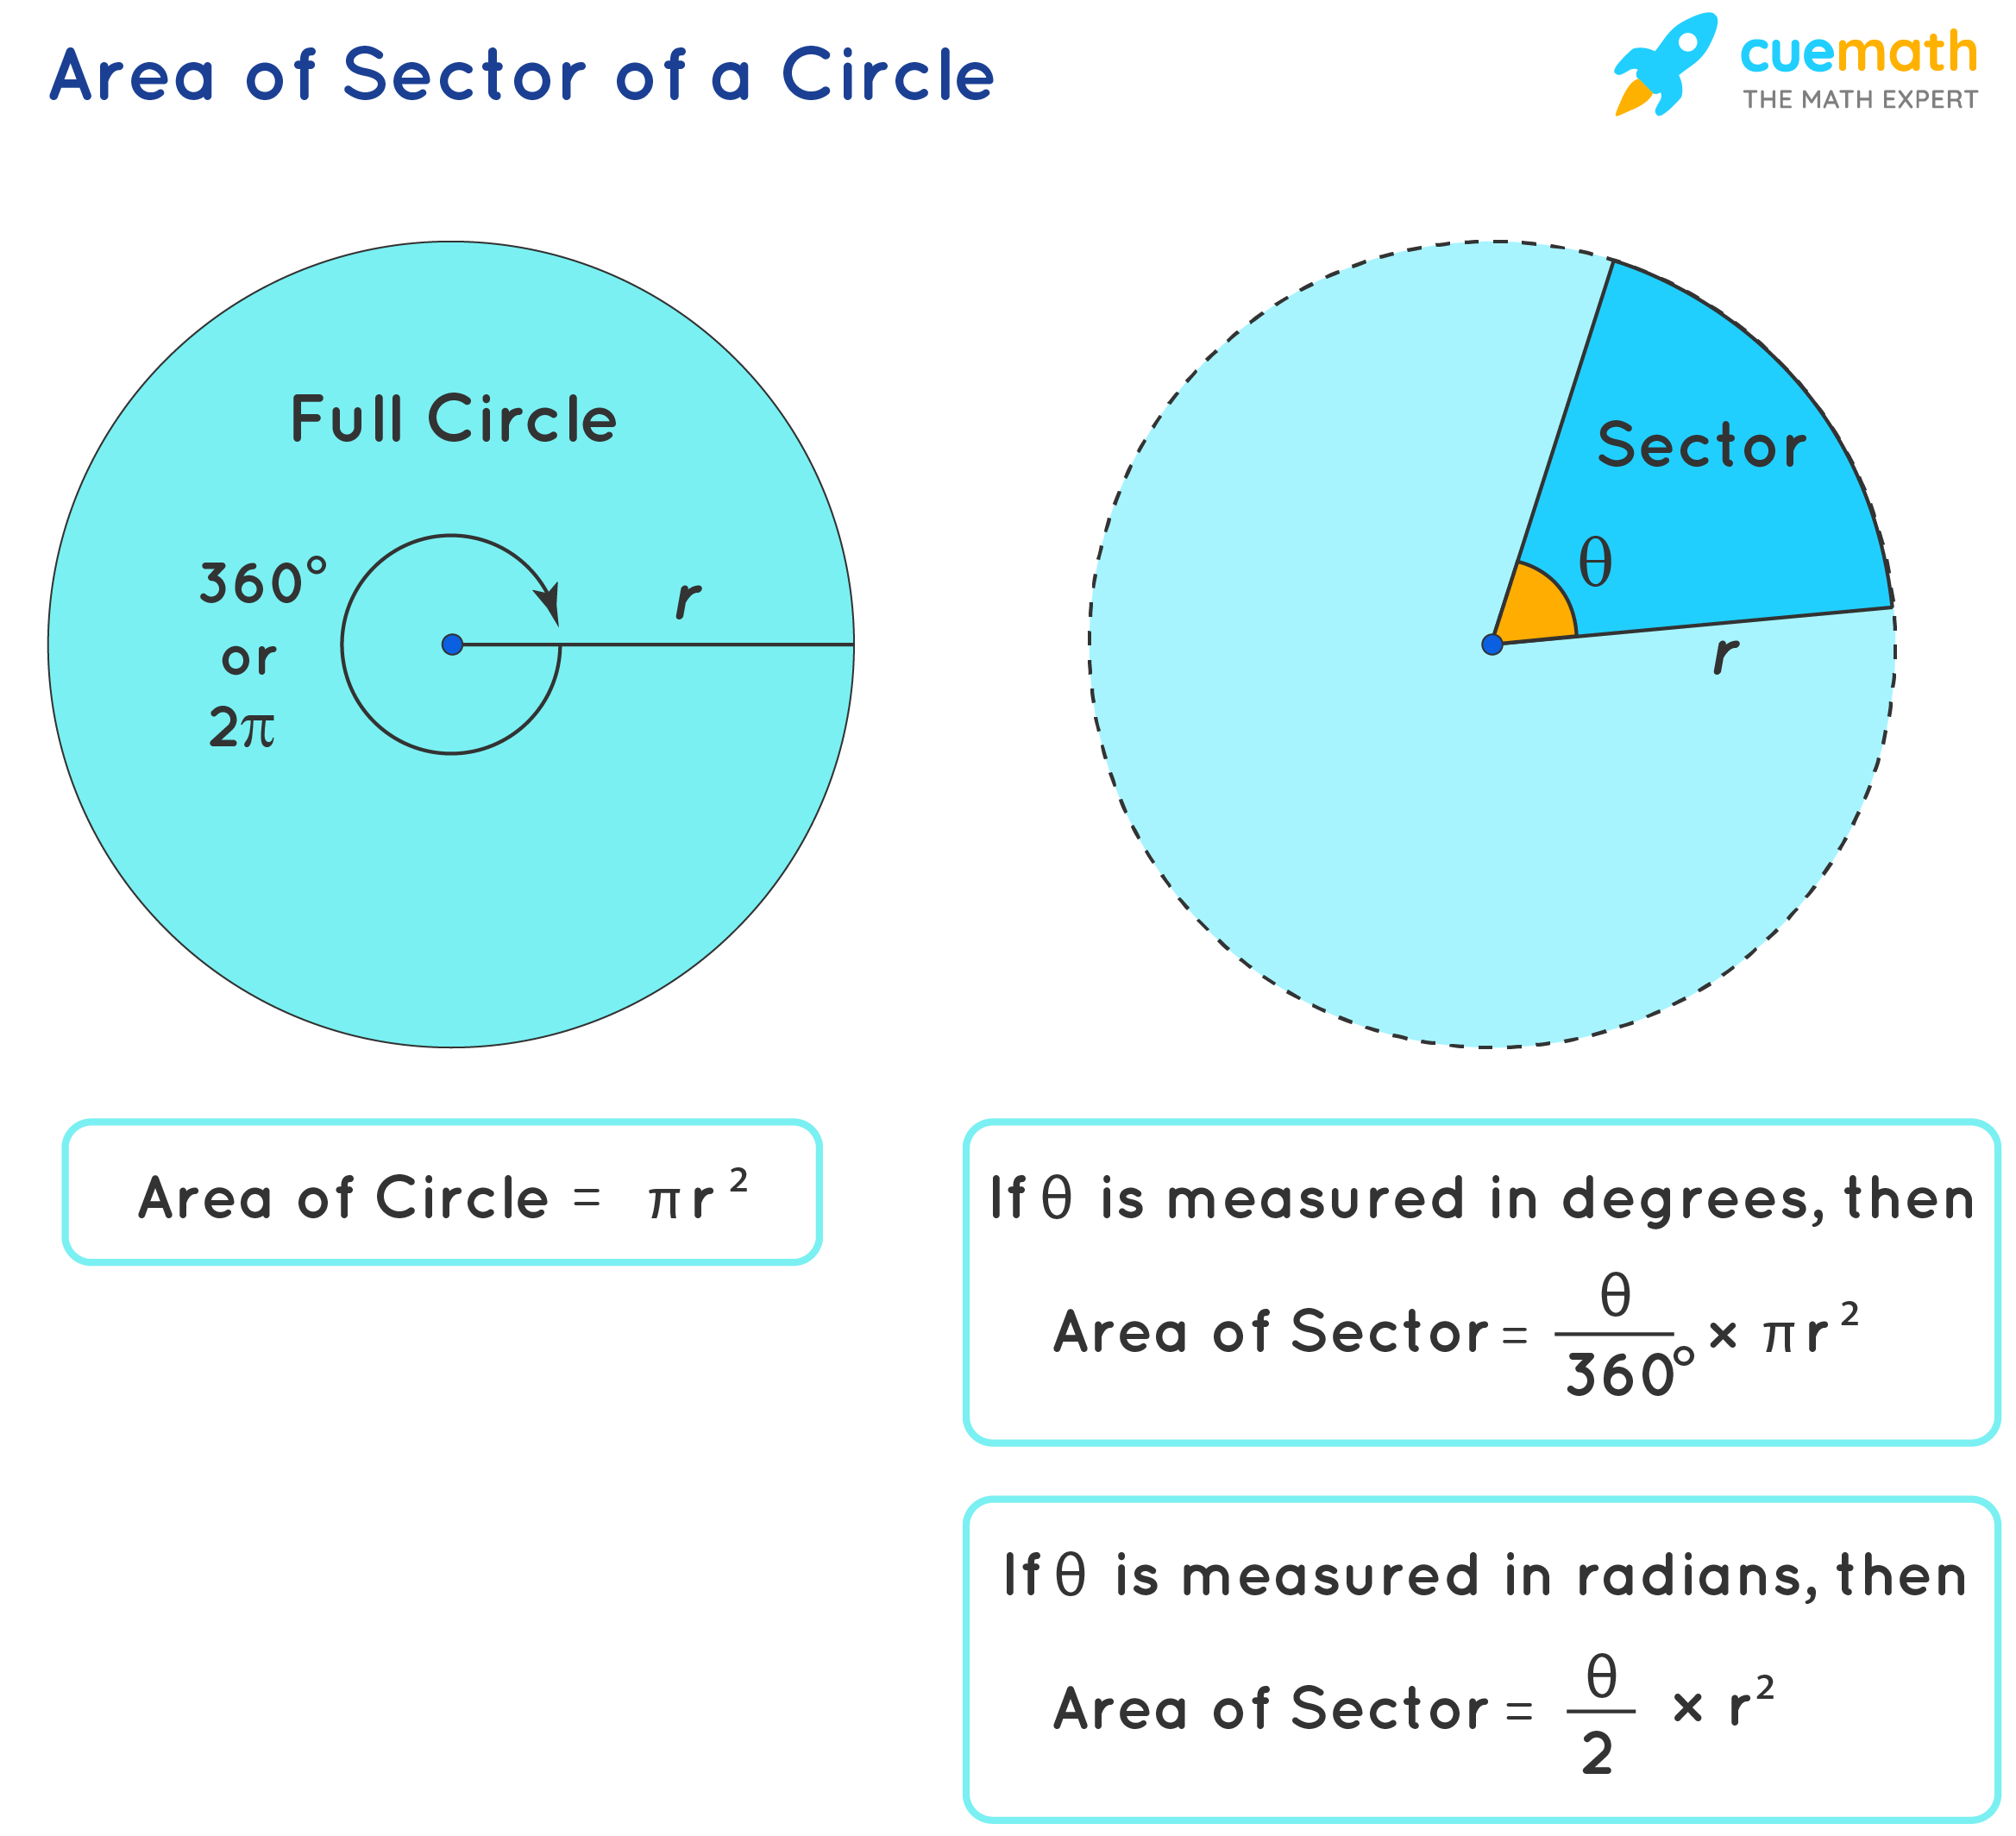 sector-of-a-circle-area-of-sector-of-circle-1620056067.png